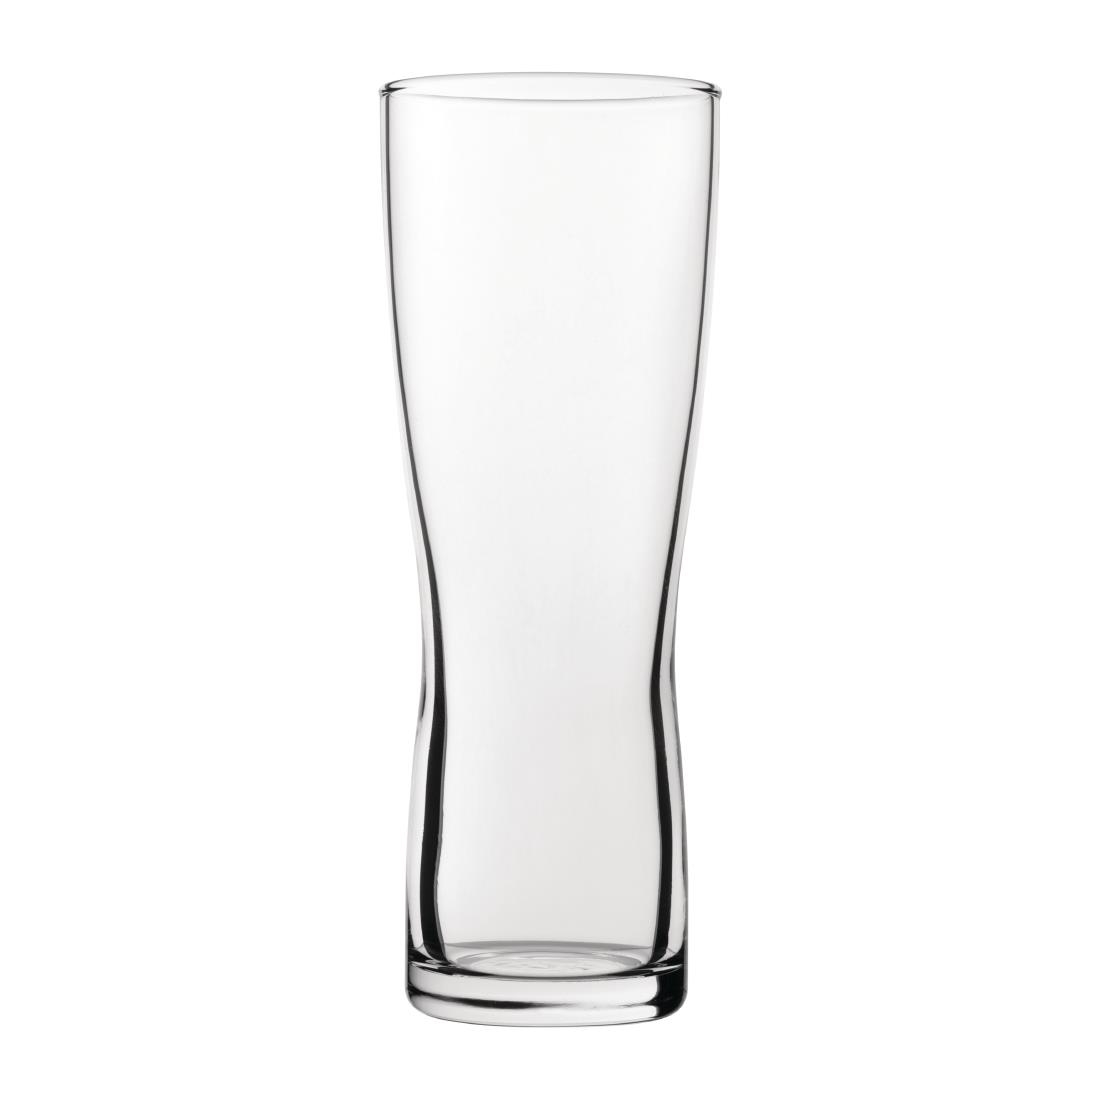 Utopia Aspen Nucleated Toughened Beer Glasses 280ml CE Marked (Pack of 24)